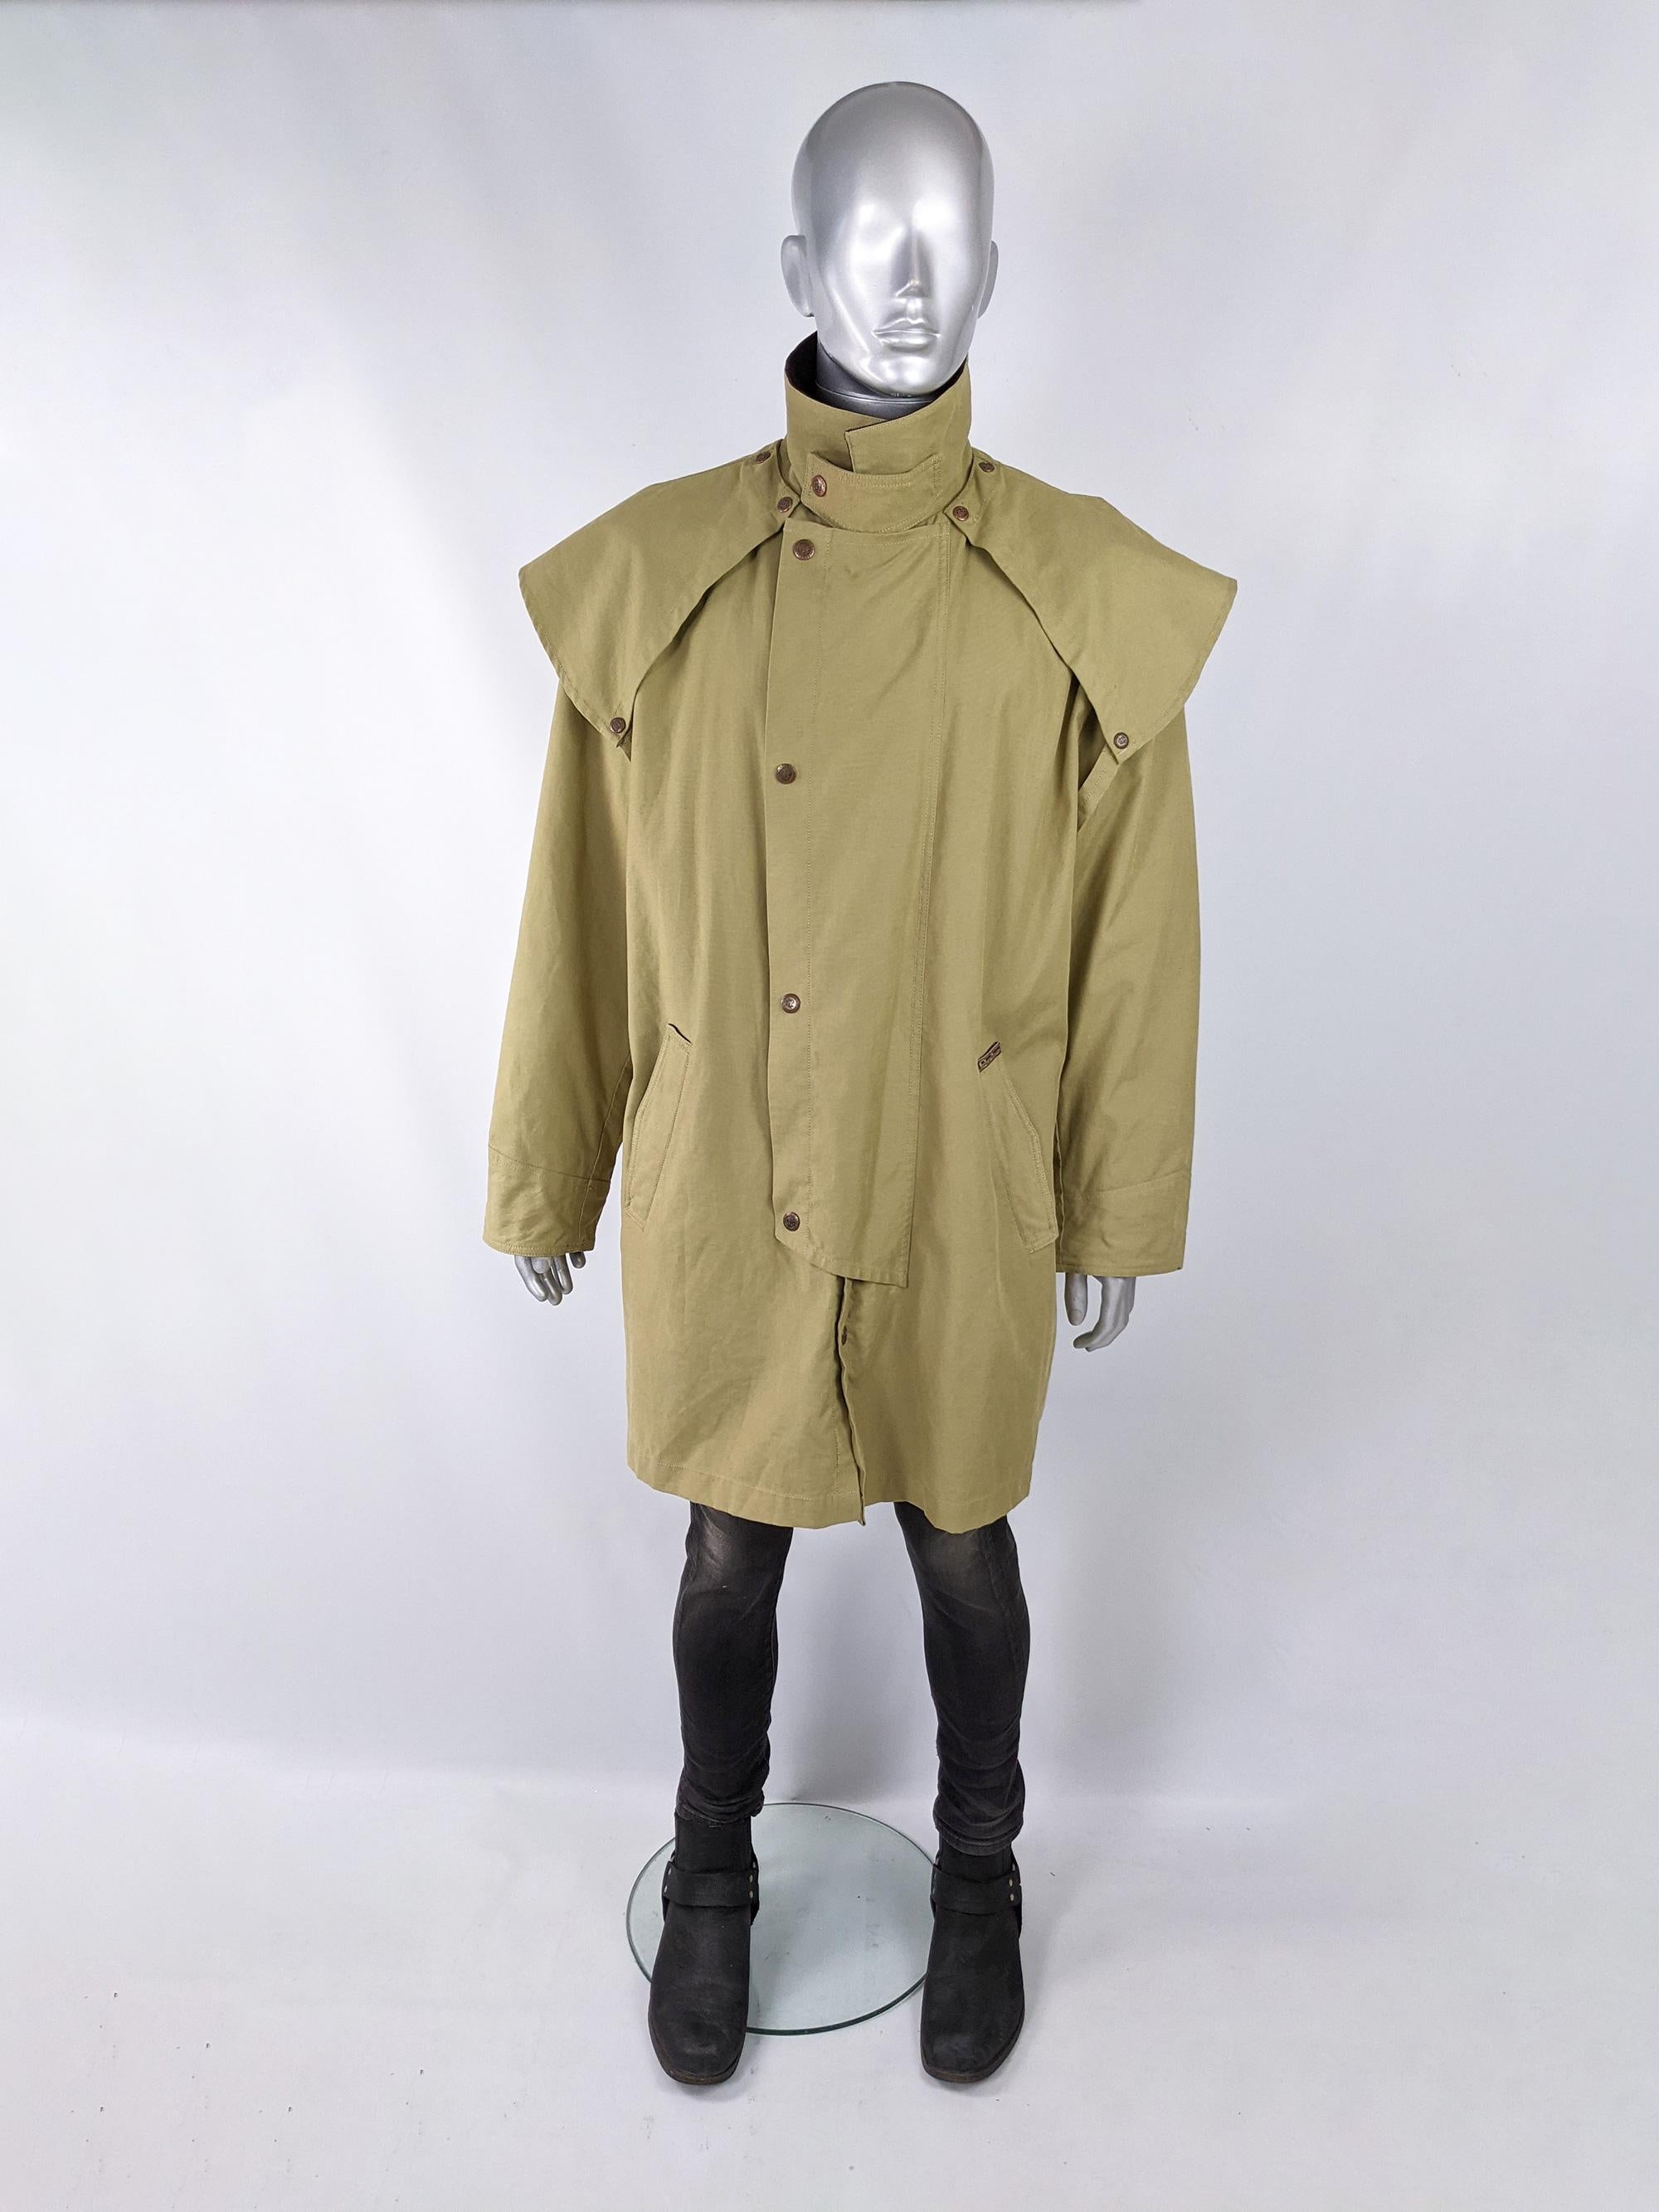 An incredible vintage mens trenchcoat from the 80s by Italian label, Marlboro Classics. In a cotton blend fabric with premium, weather protecting details like the corduroy collar which can be stood up and fastened with the collar strap and the